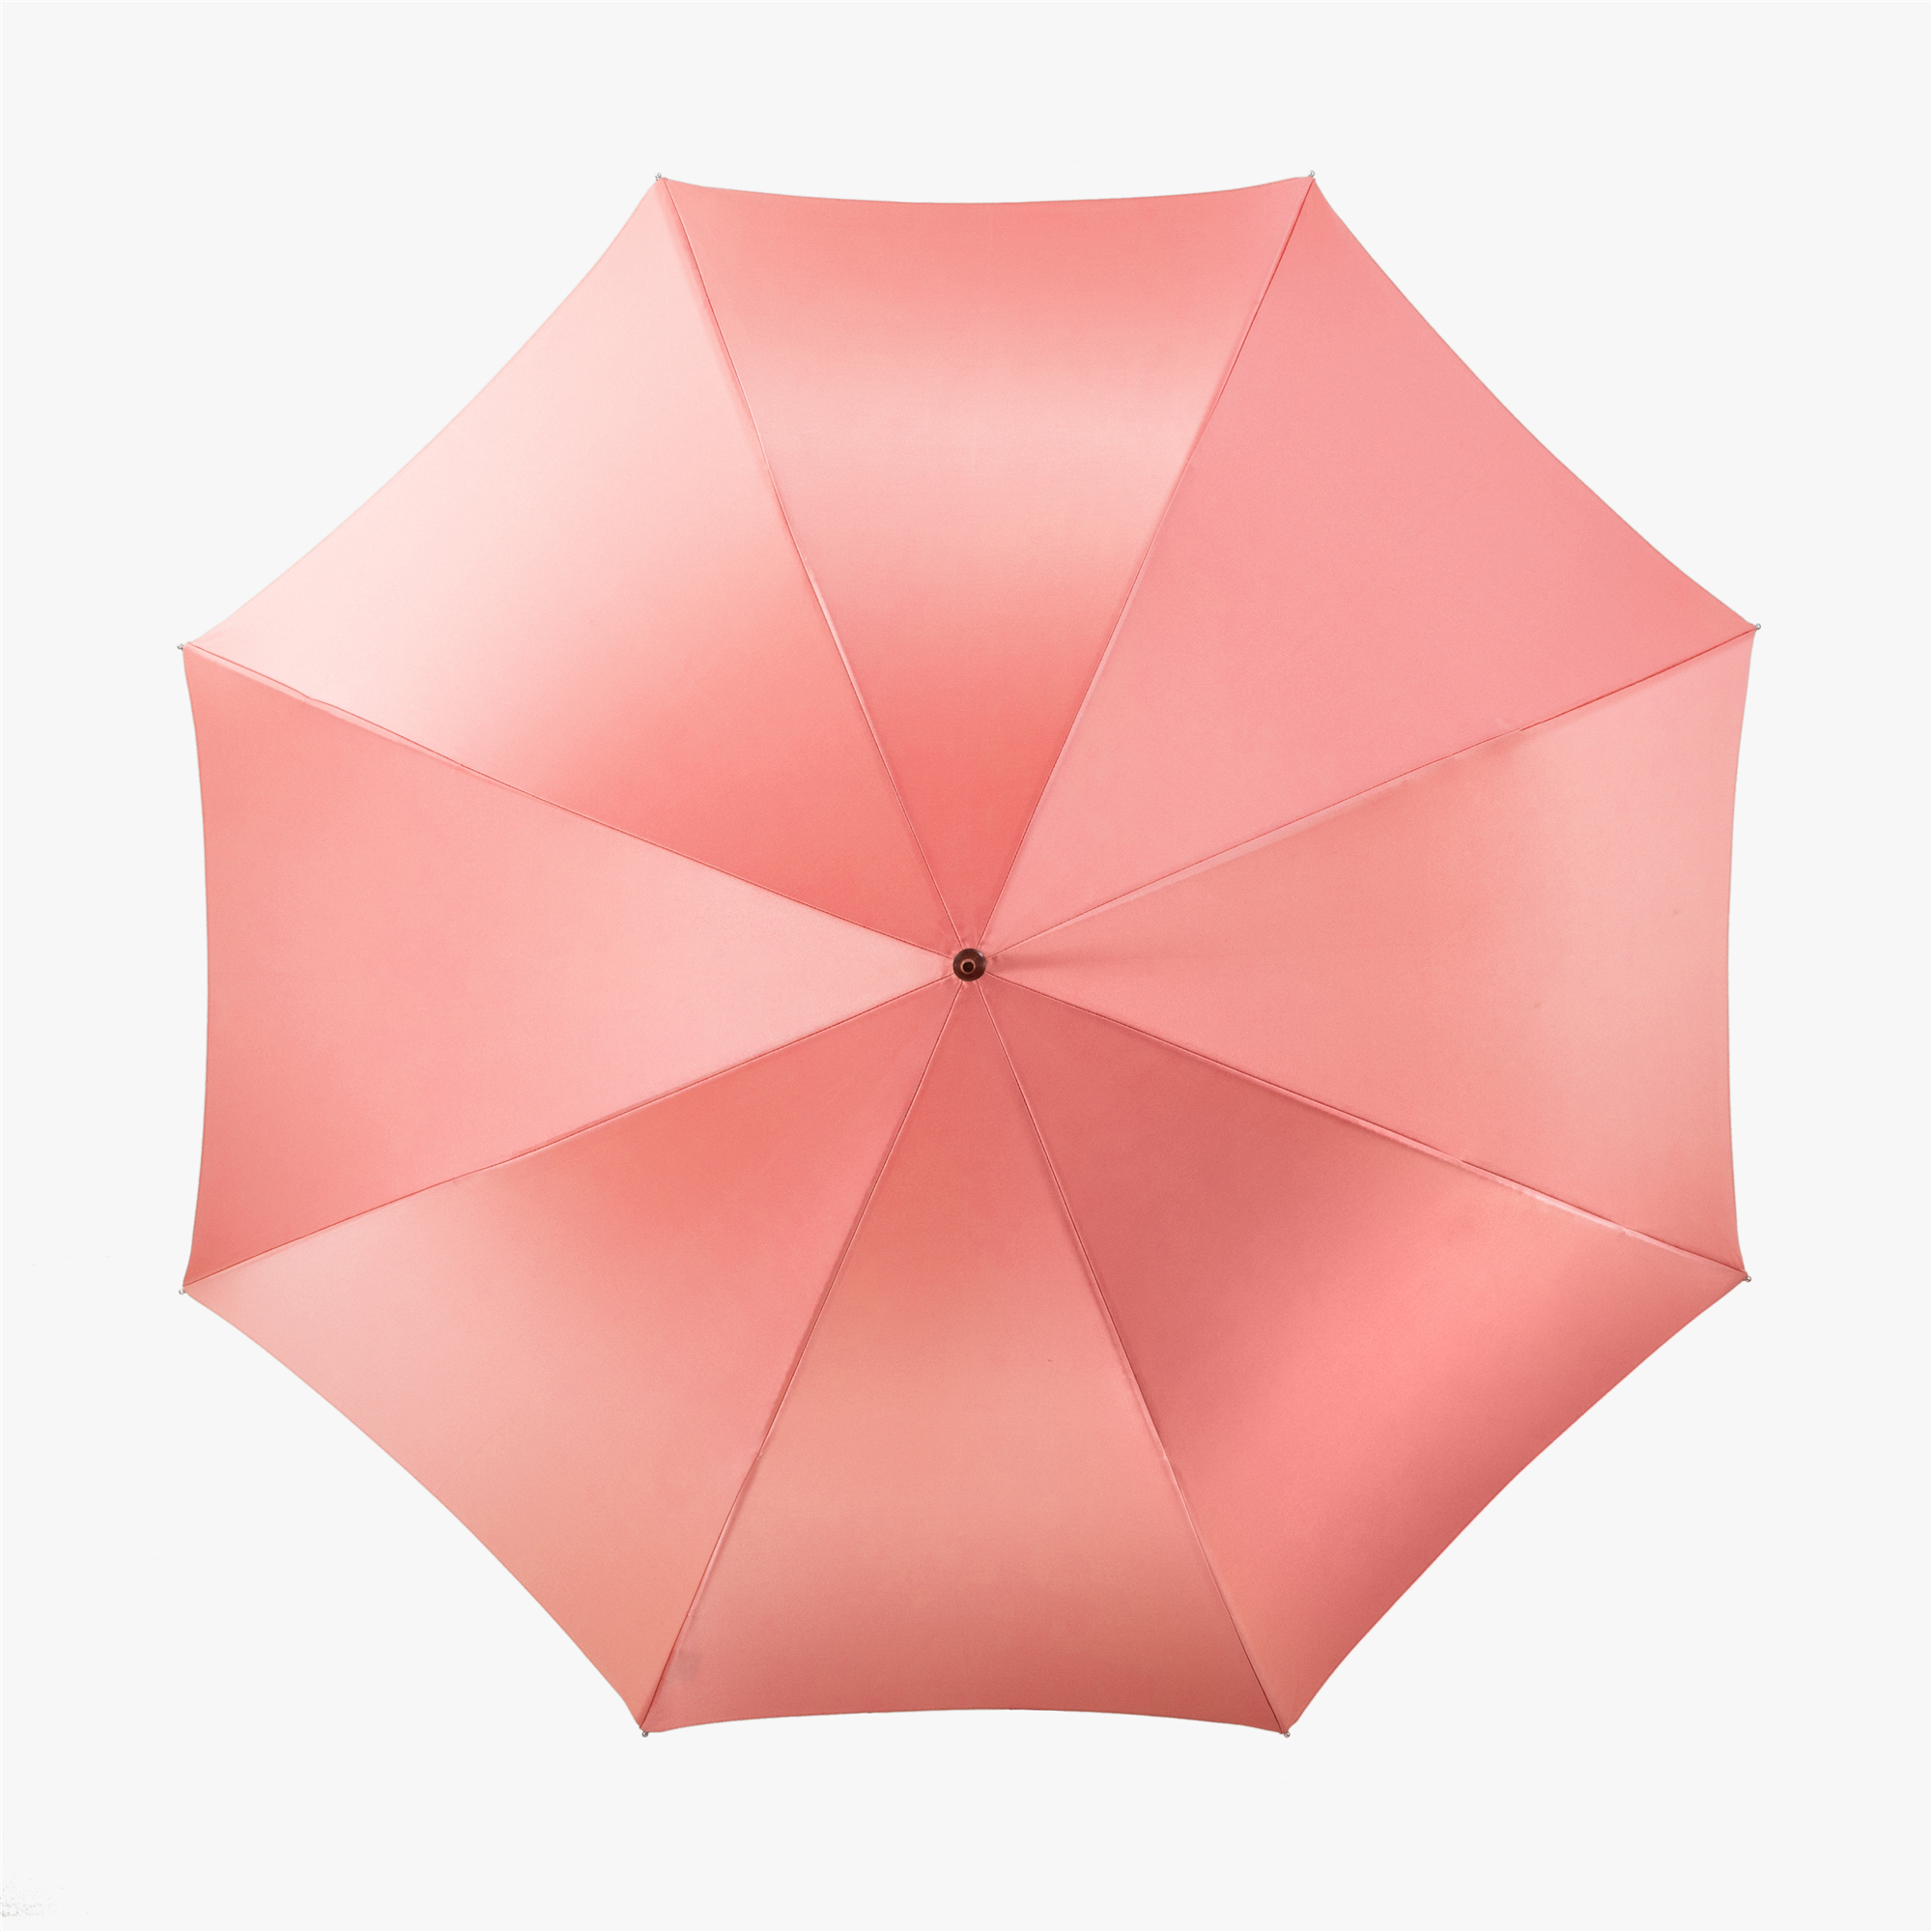 Curved handle rose double long handle umbrella